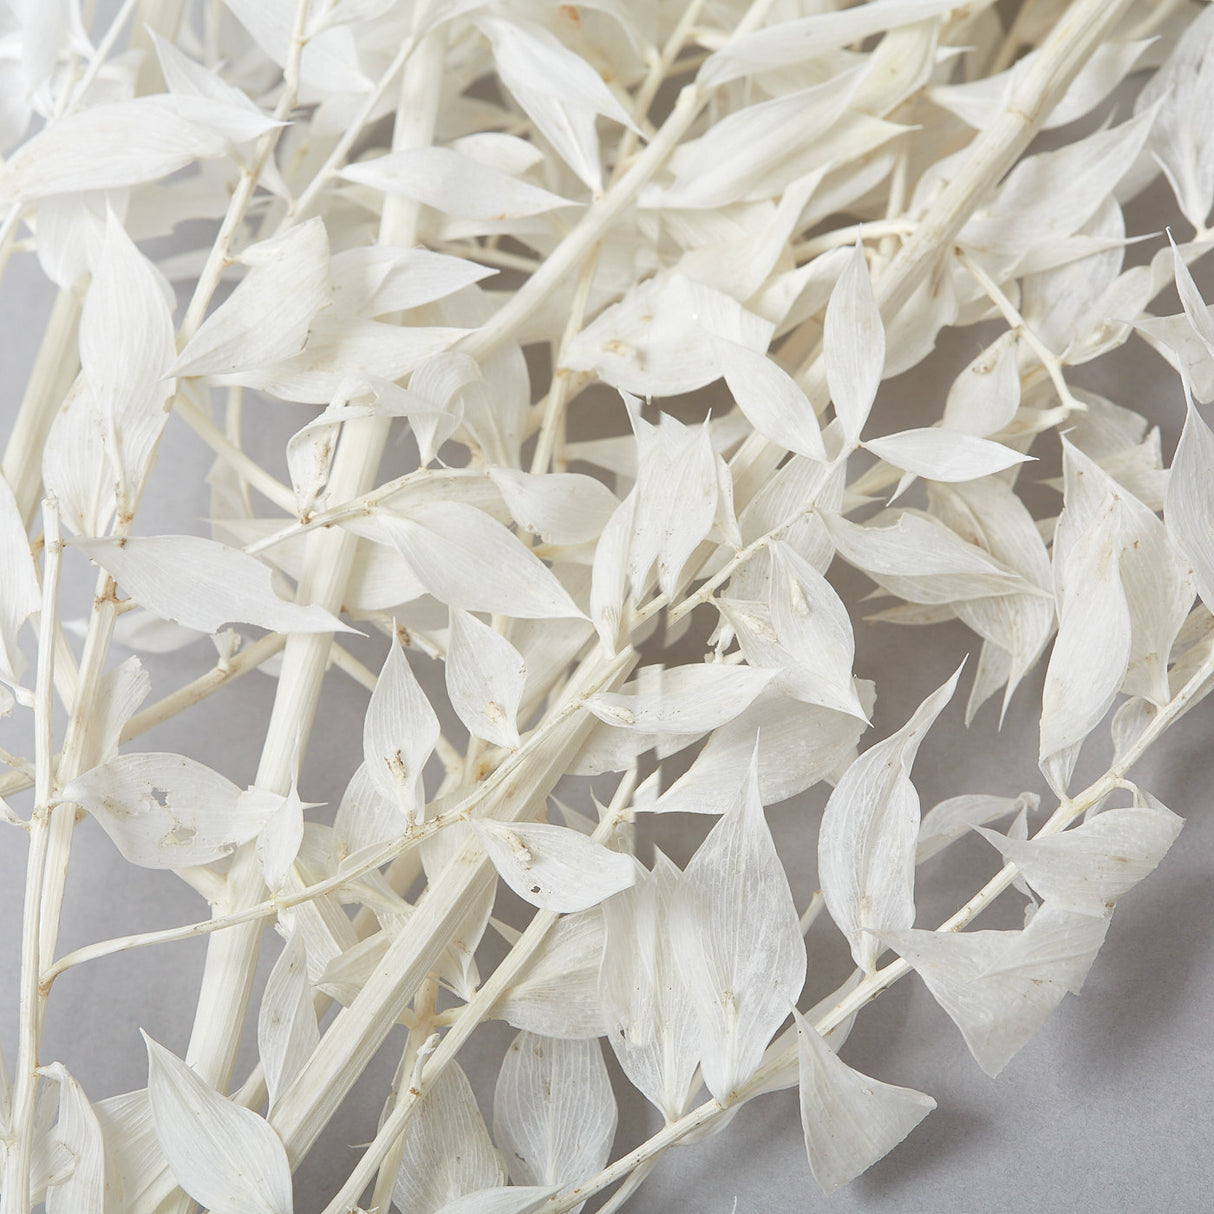 This is a bunch of Ruscus stems that have been bleached to a soft white colour.